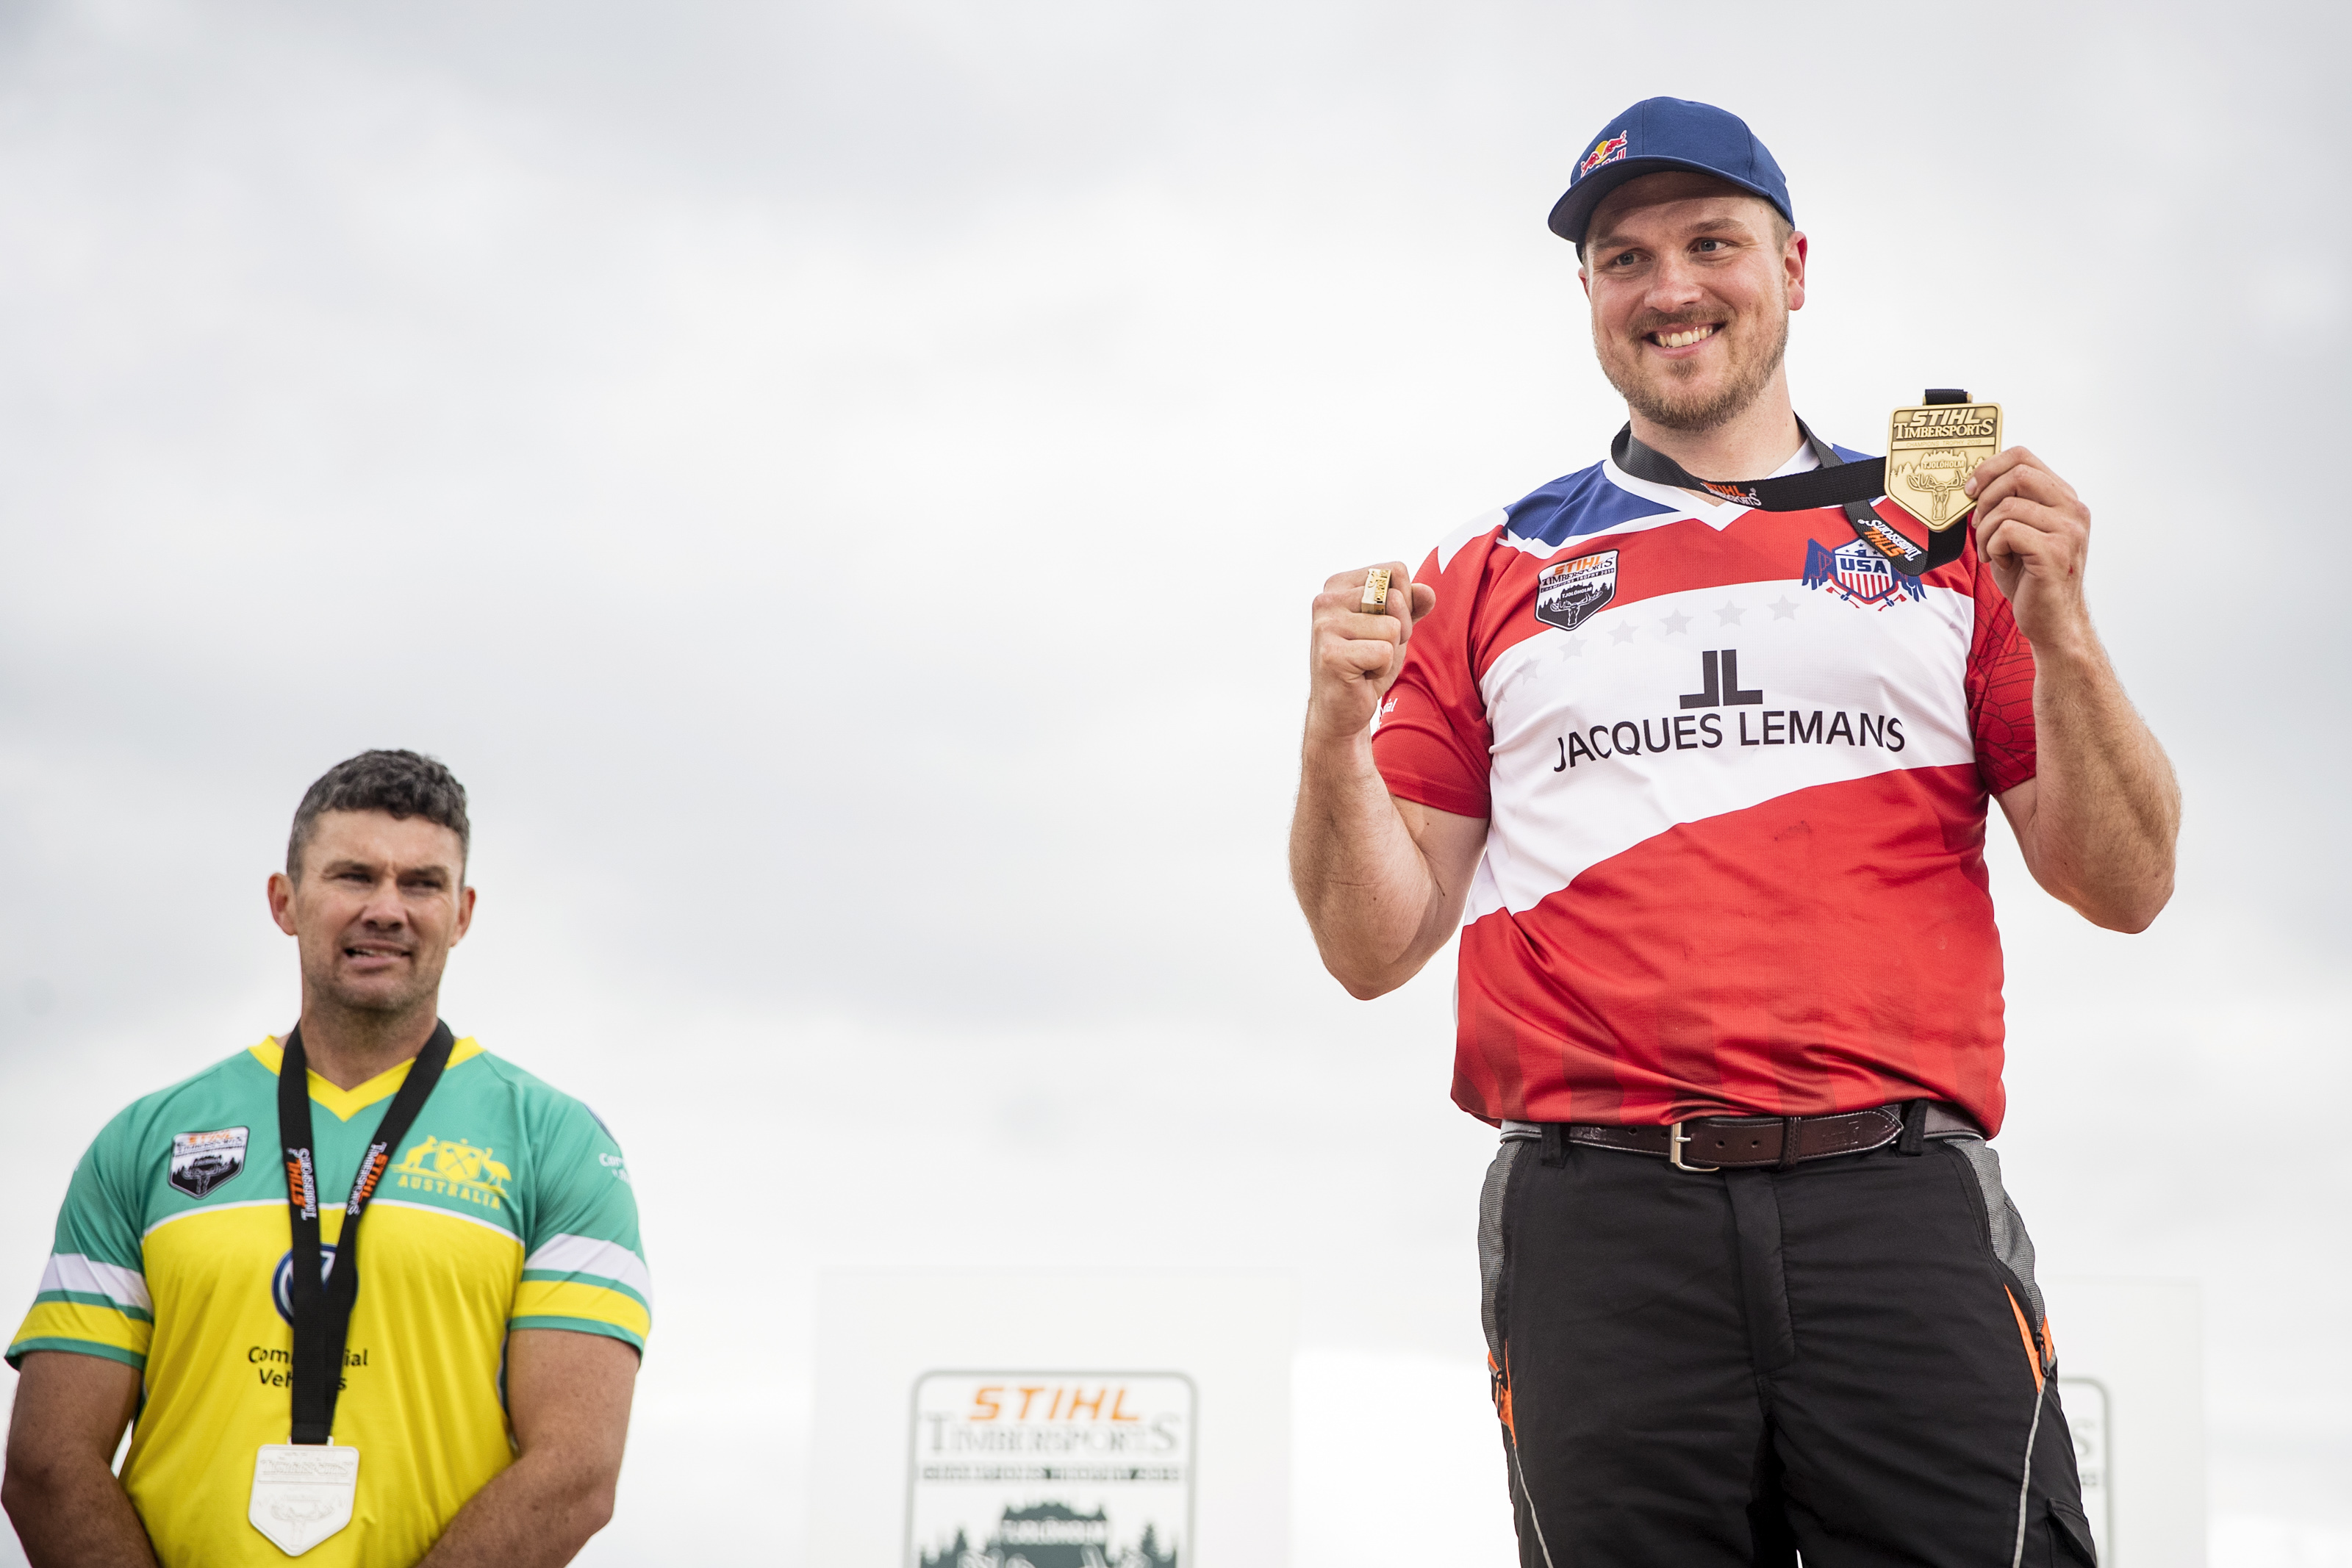 Matt Cogar's triumph at the 2019 World Trophy is one of many others in his family history.